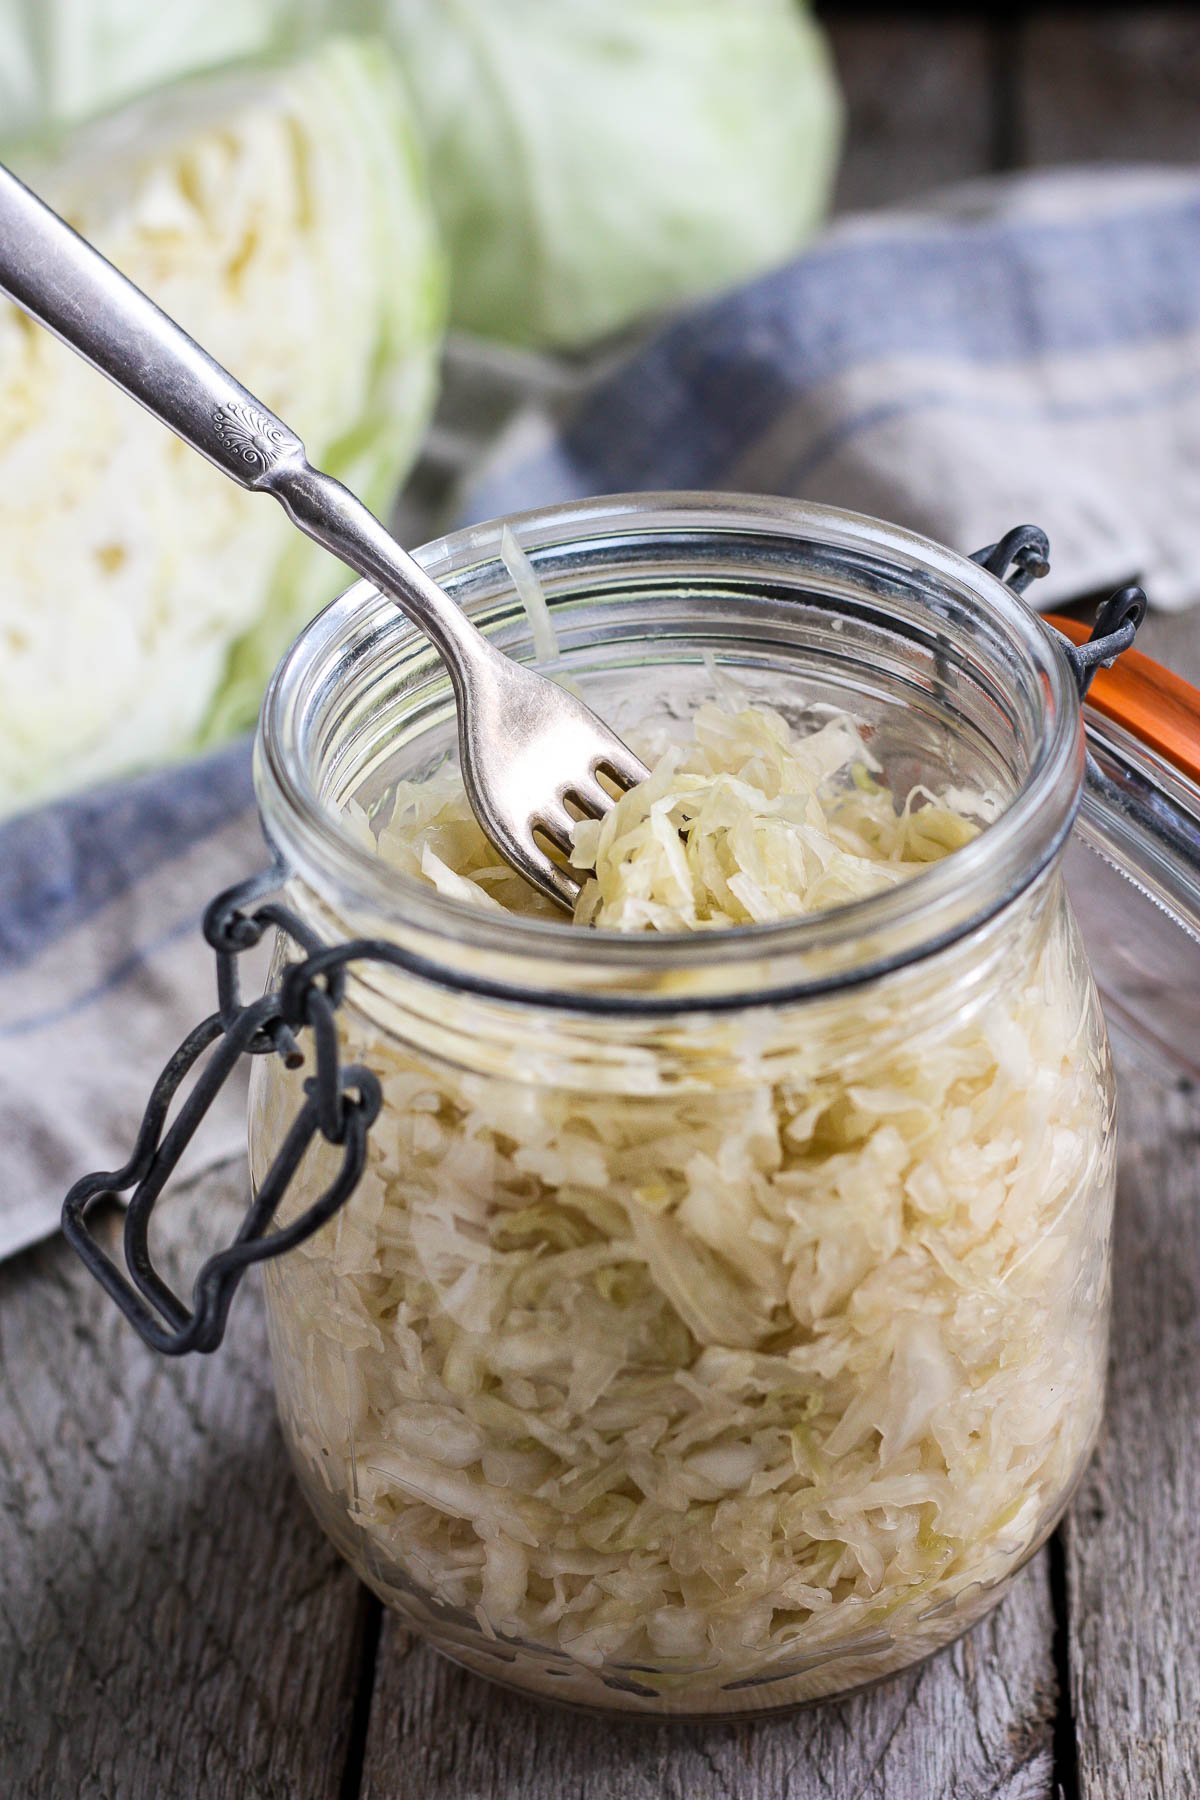 How to make Simple Cultured Cabbage!  Aka Sauerkraut- a delicious tangy addition to many dishes. Brimming with gut-healing probiotics, fermented cabbage is easy to make at home with just two ingredients!  